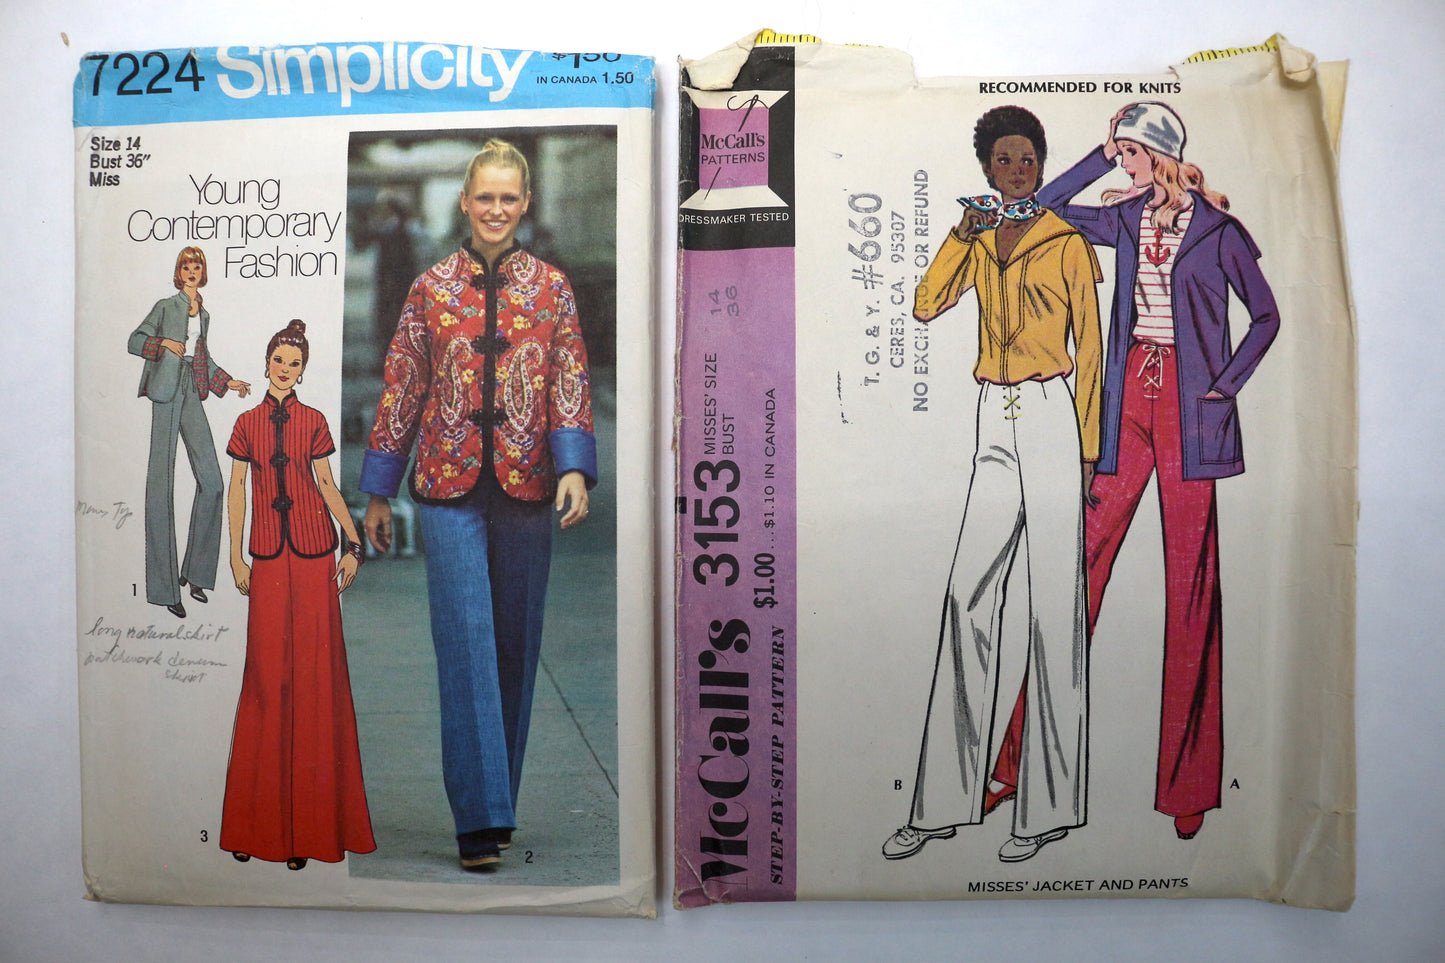 Simplicity 7224 Sewing Pattern or McCalls 3153 Sewing Pattern